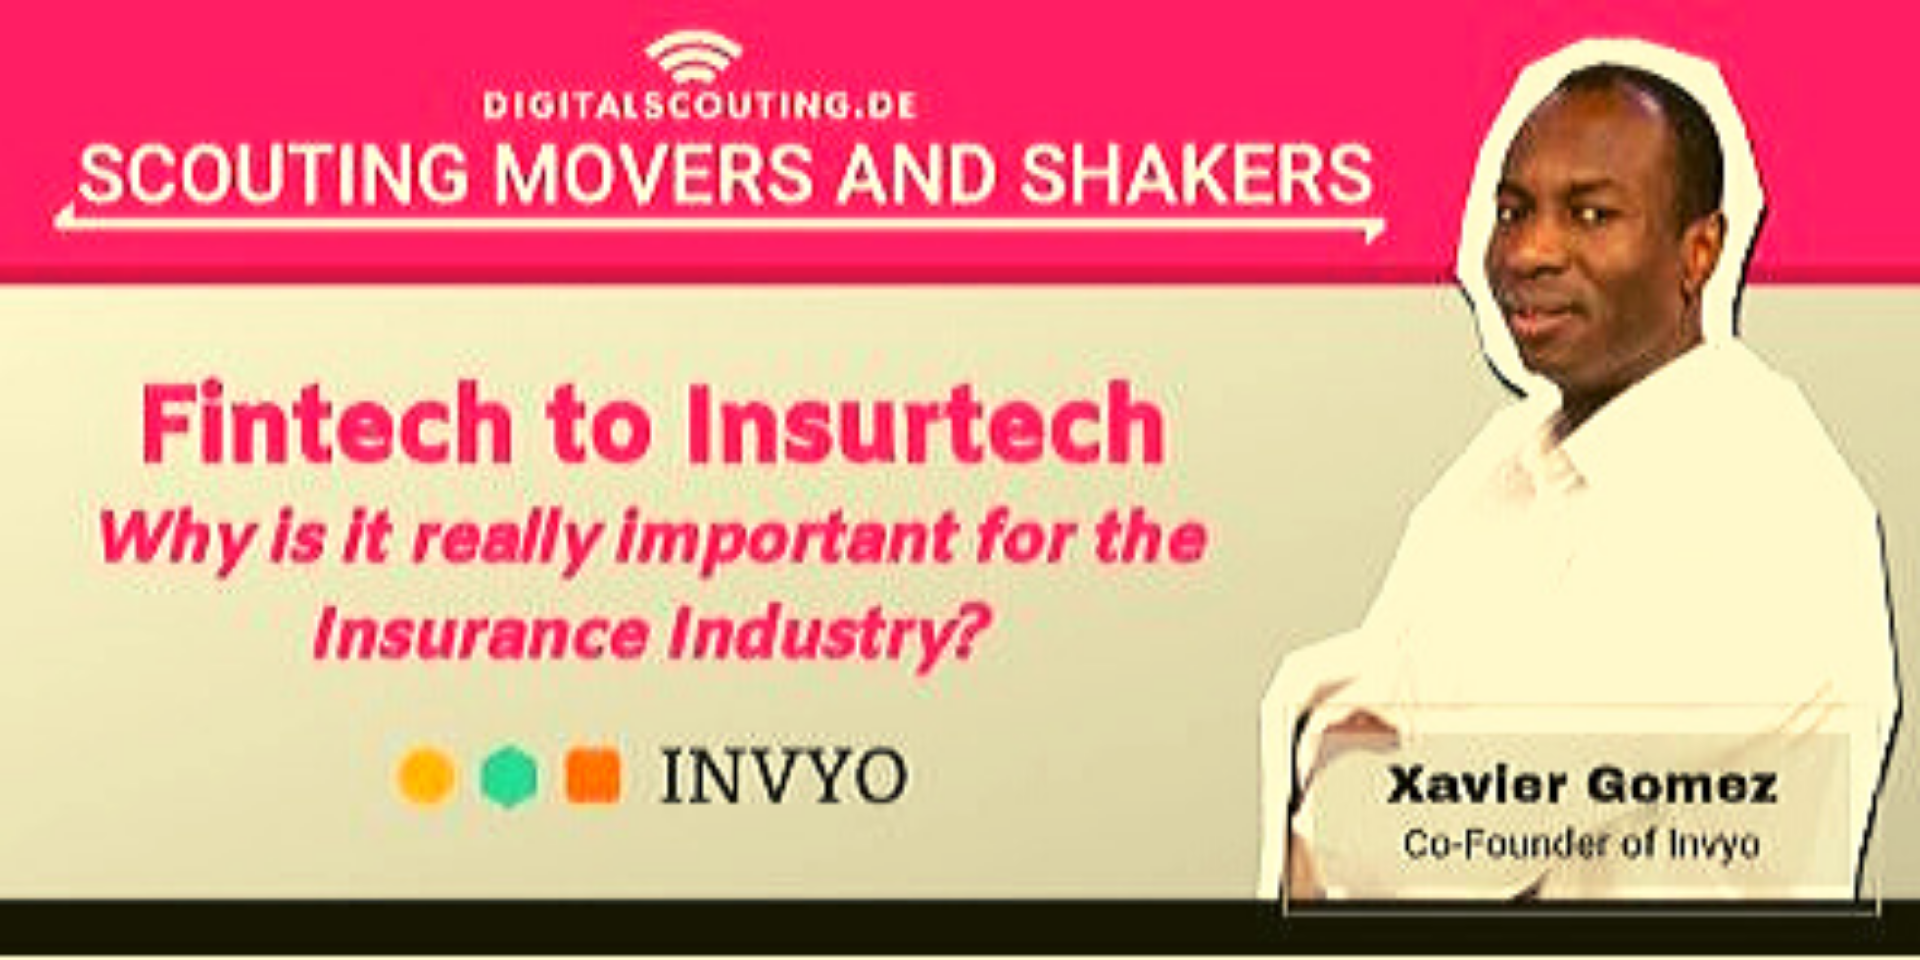 “Fintech to Insurtech, Why is it really important for the Insurance Industry?” Xavier Gomez, Co-Founder of Invyo